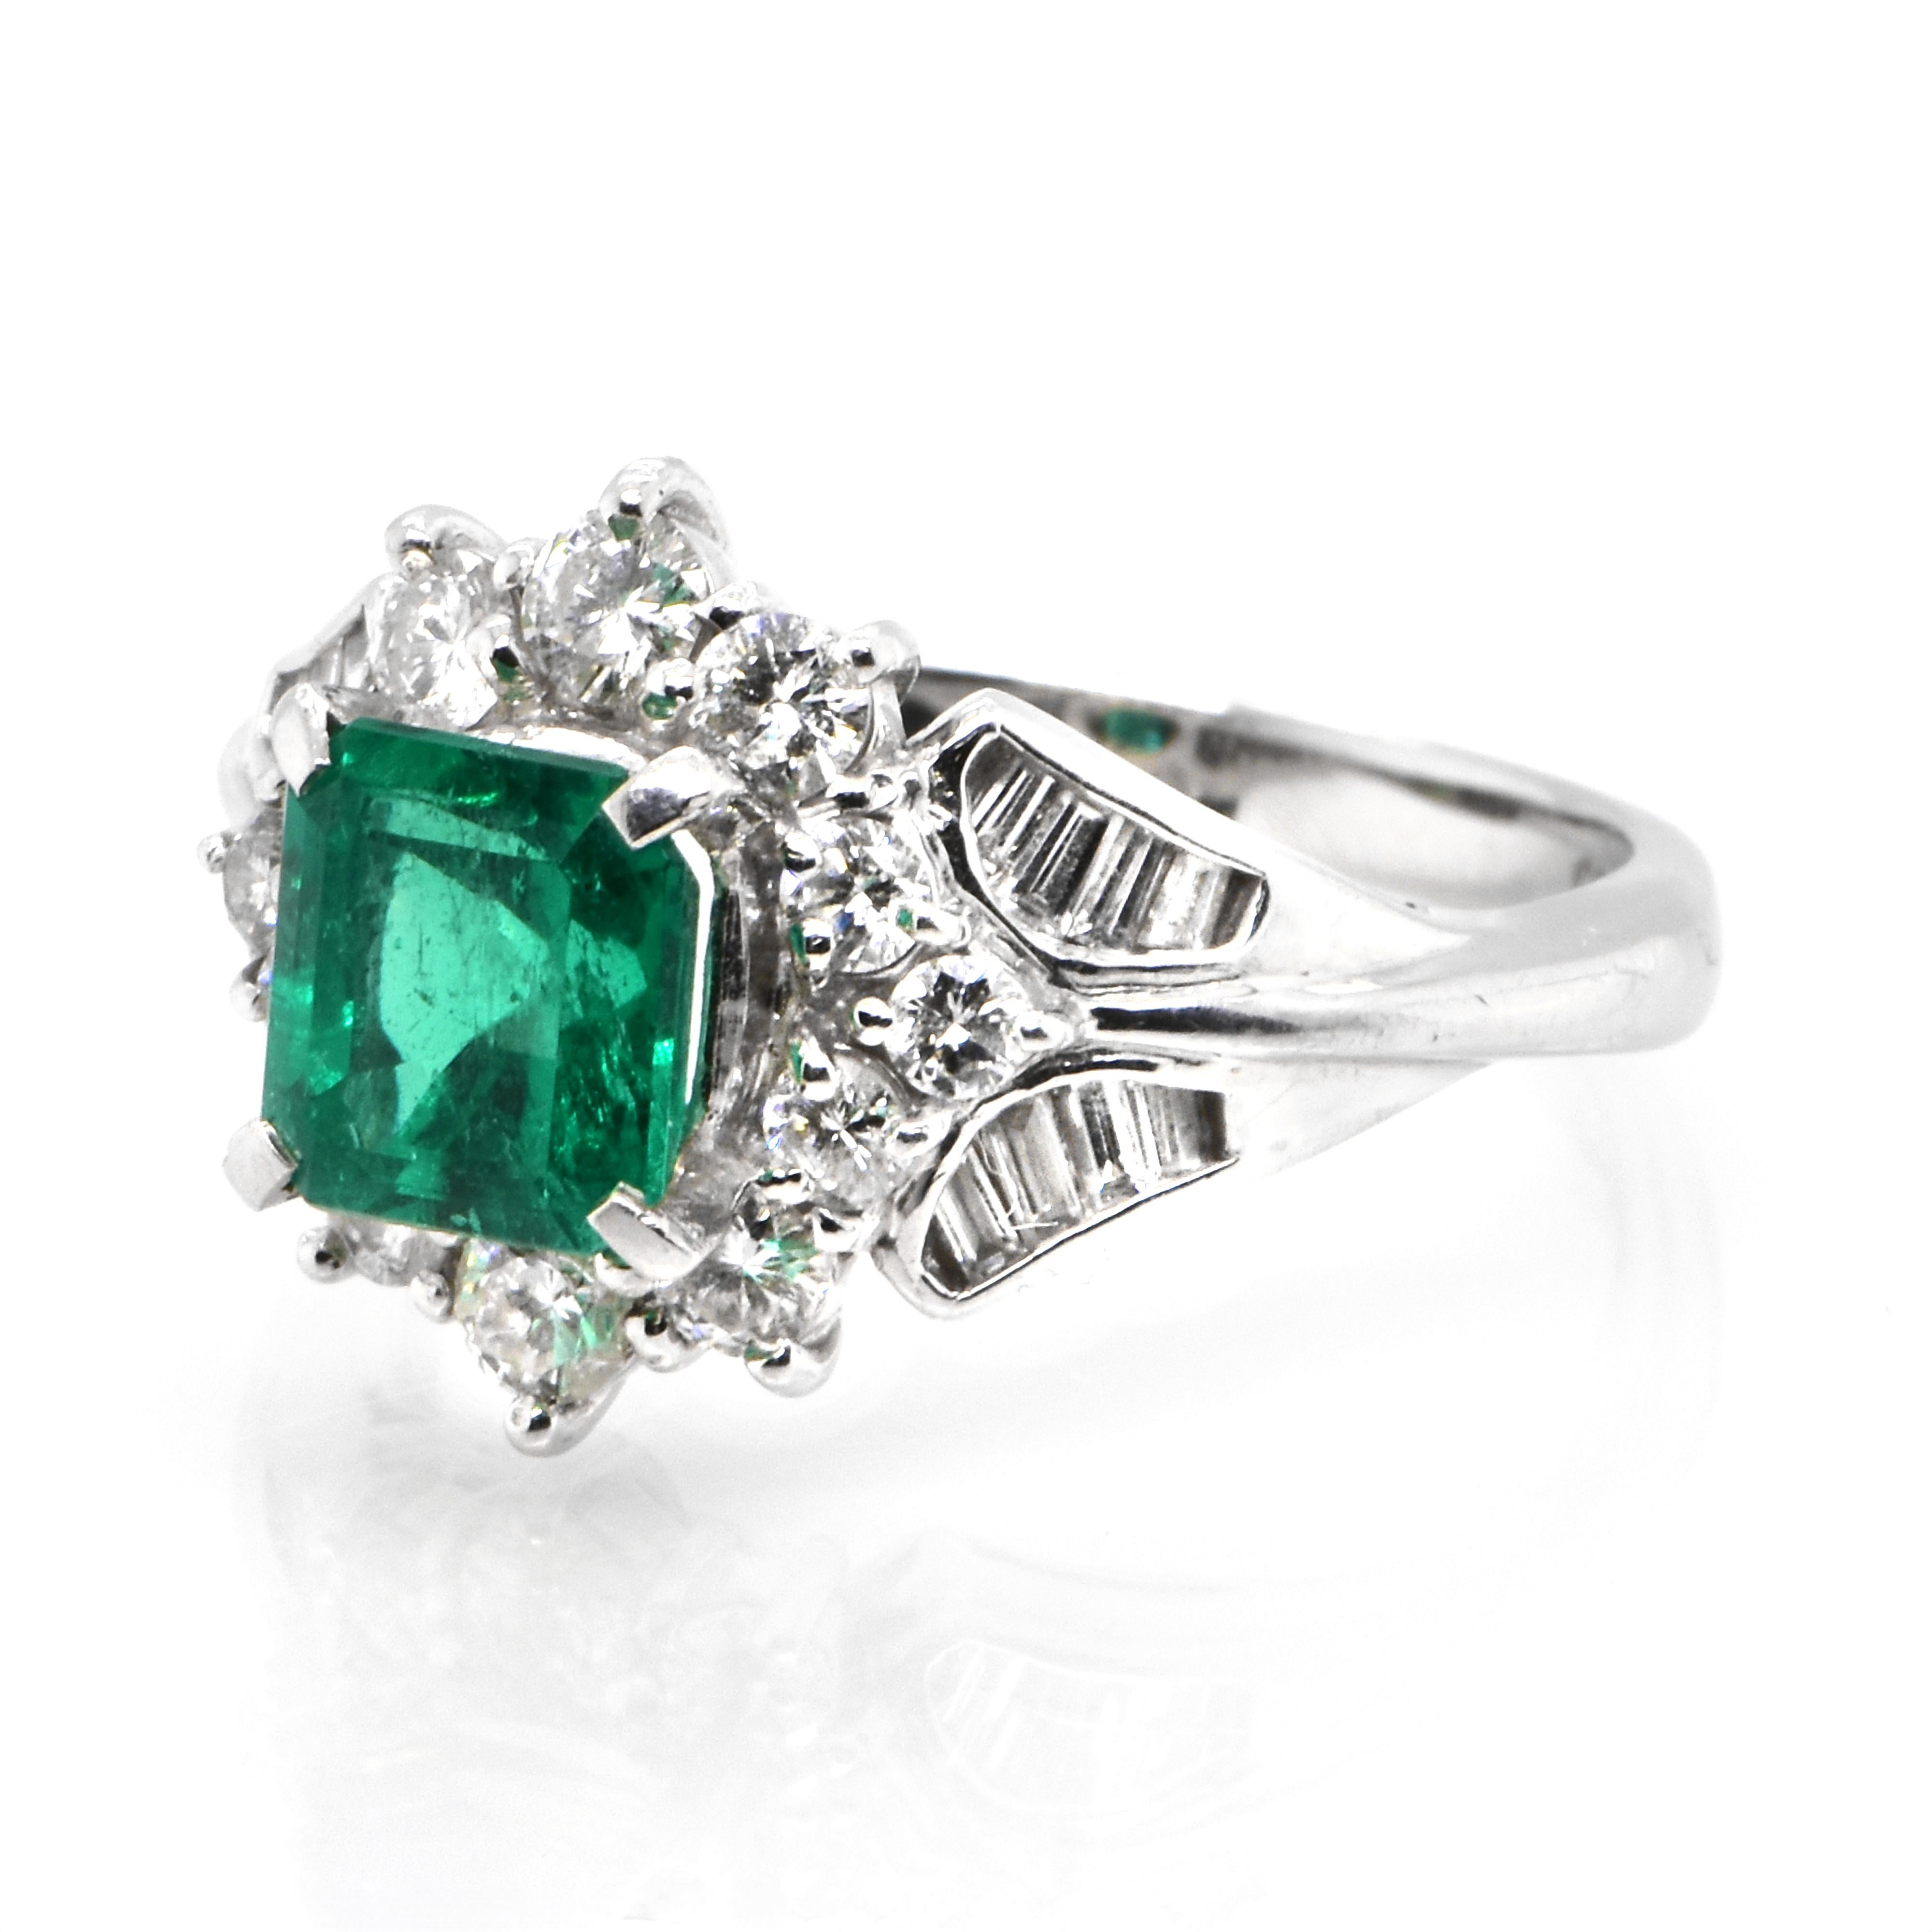 A stunning ring featuring a 1.27 Carat Natural Emerald and 0.75 Carats of Diamond Accents set in Platinum. People have admired emerald’s green for thousands of years. Emeralds have always been associated with the lushest landscapes and the richest